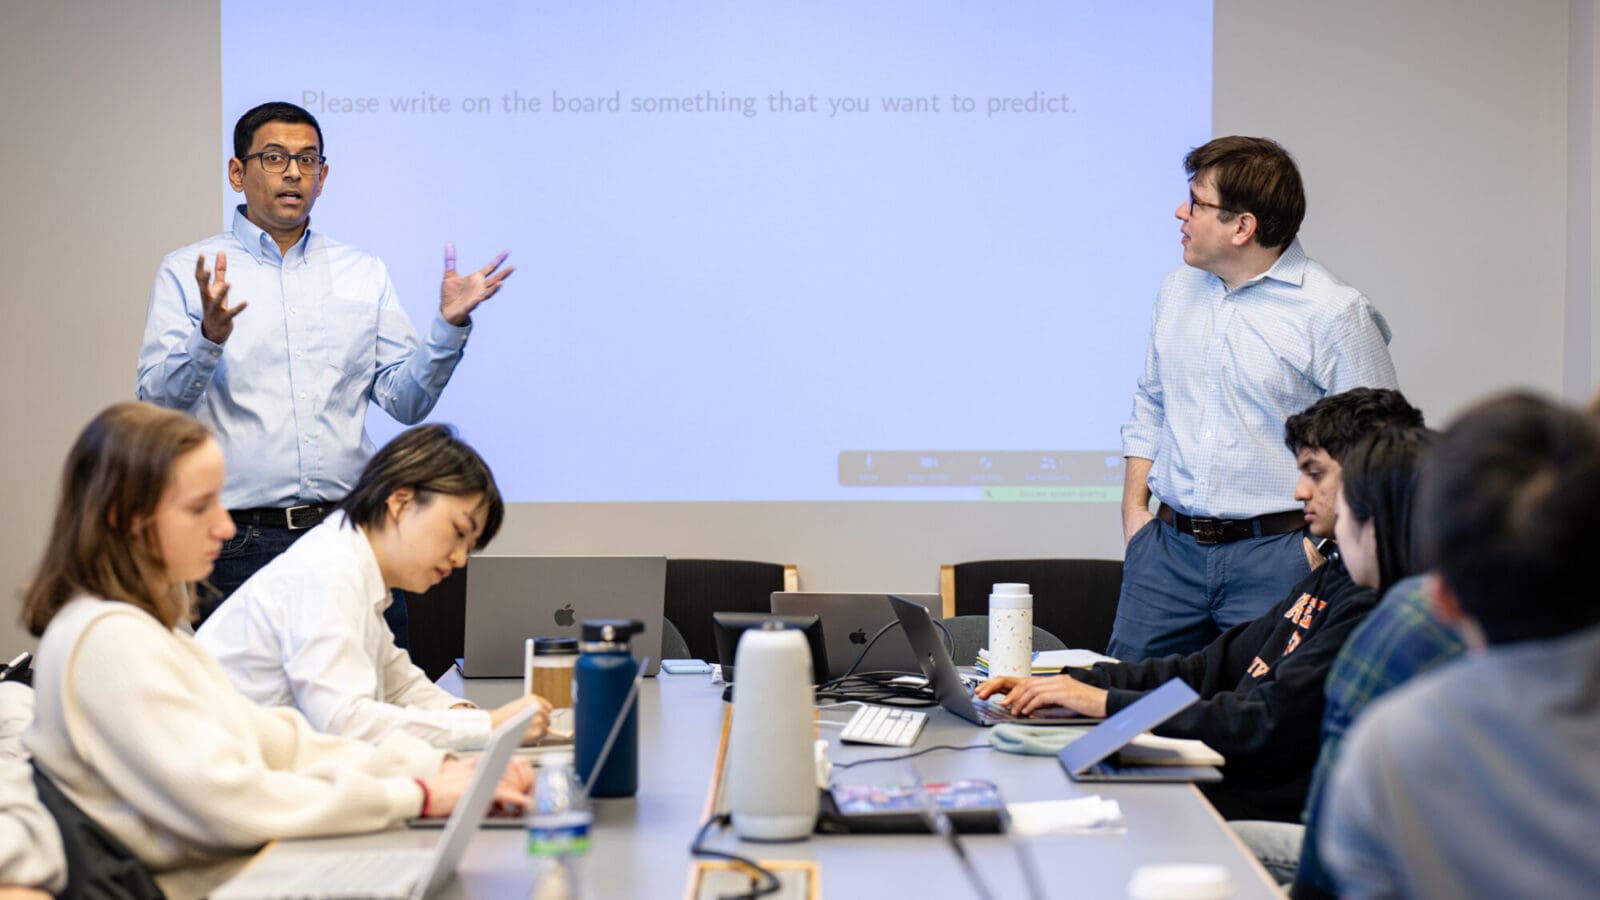 Two instructors speak to students while standing before a white board